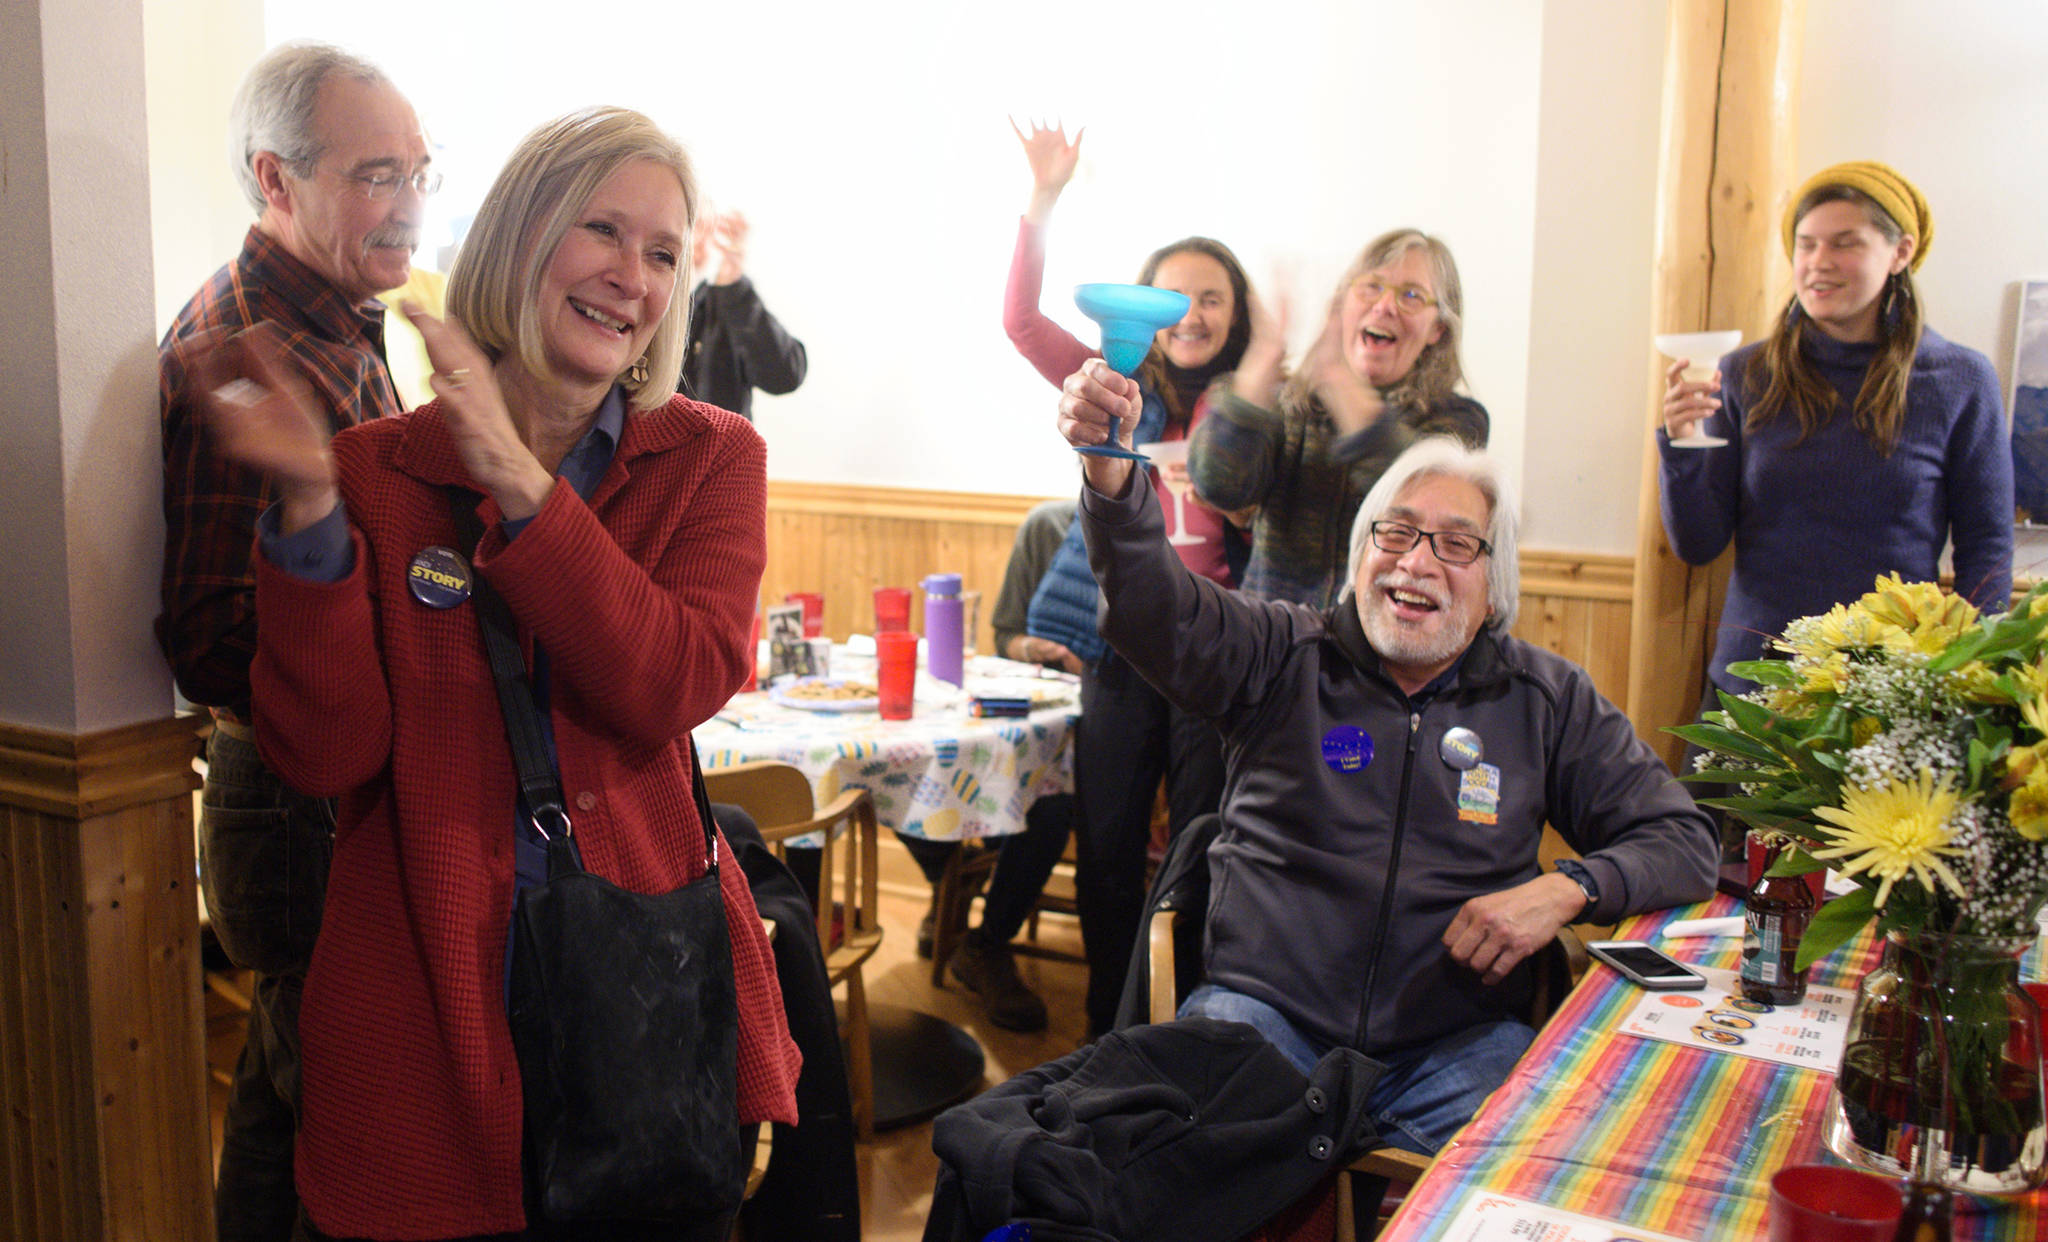 Andi Story, Democratic candidate for House District 34, celebrates her election night win with family on Tuesday. Story defeated Republican candidate Jerry Nankervis to take hold of one of three contested statehouse seats. (Michael Penn | Juneau Empire)